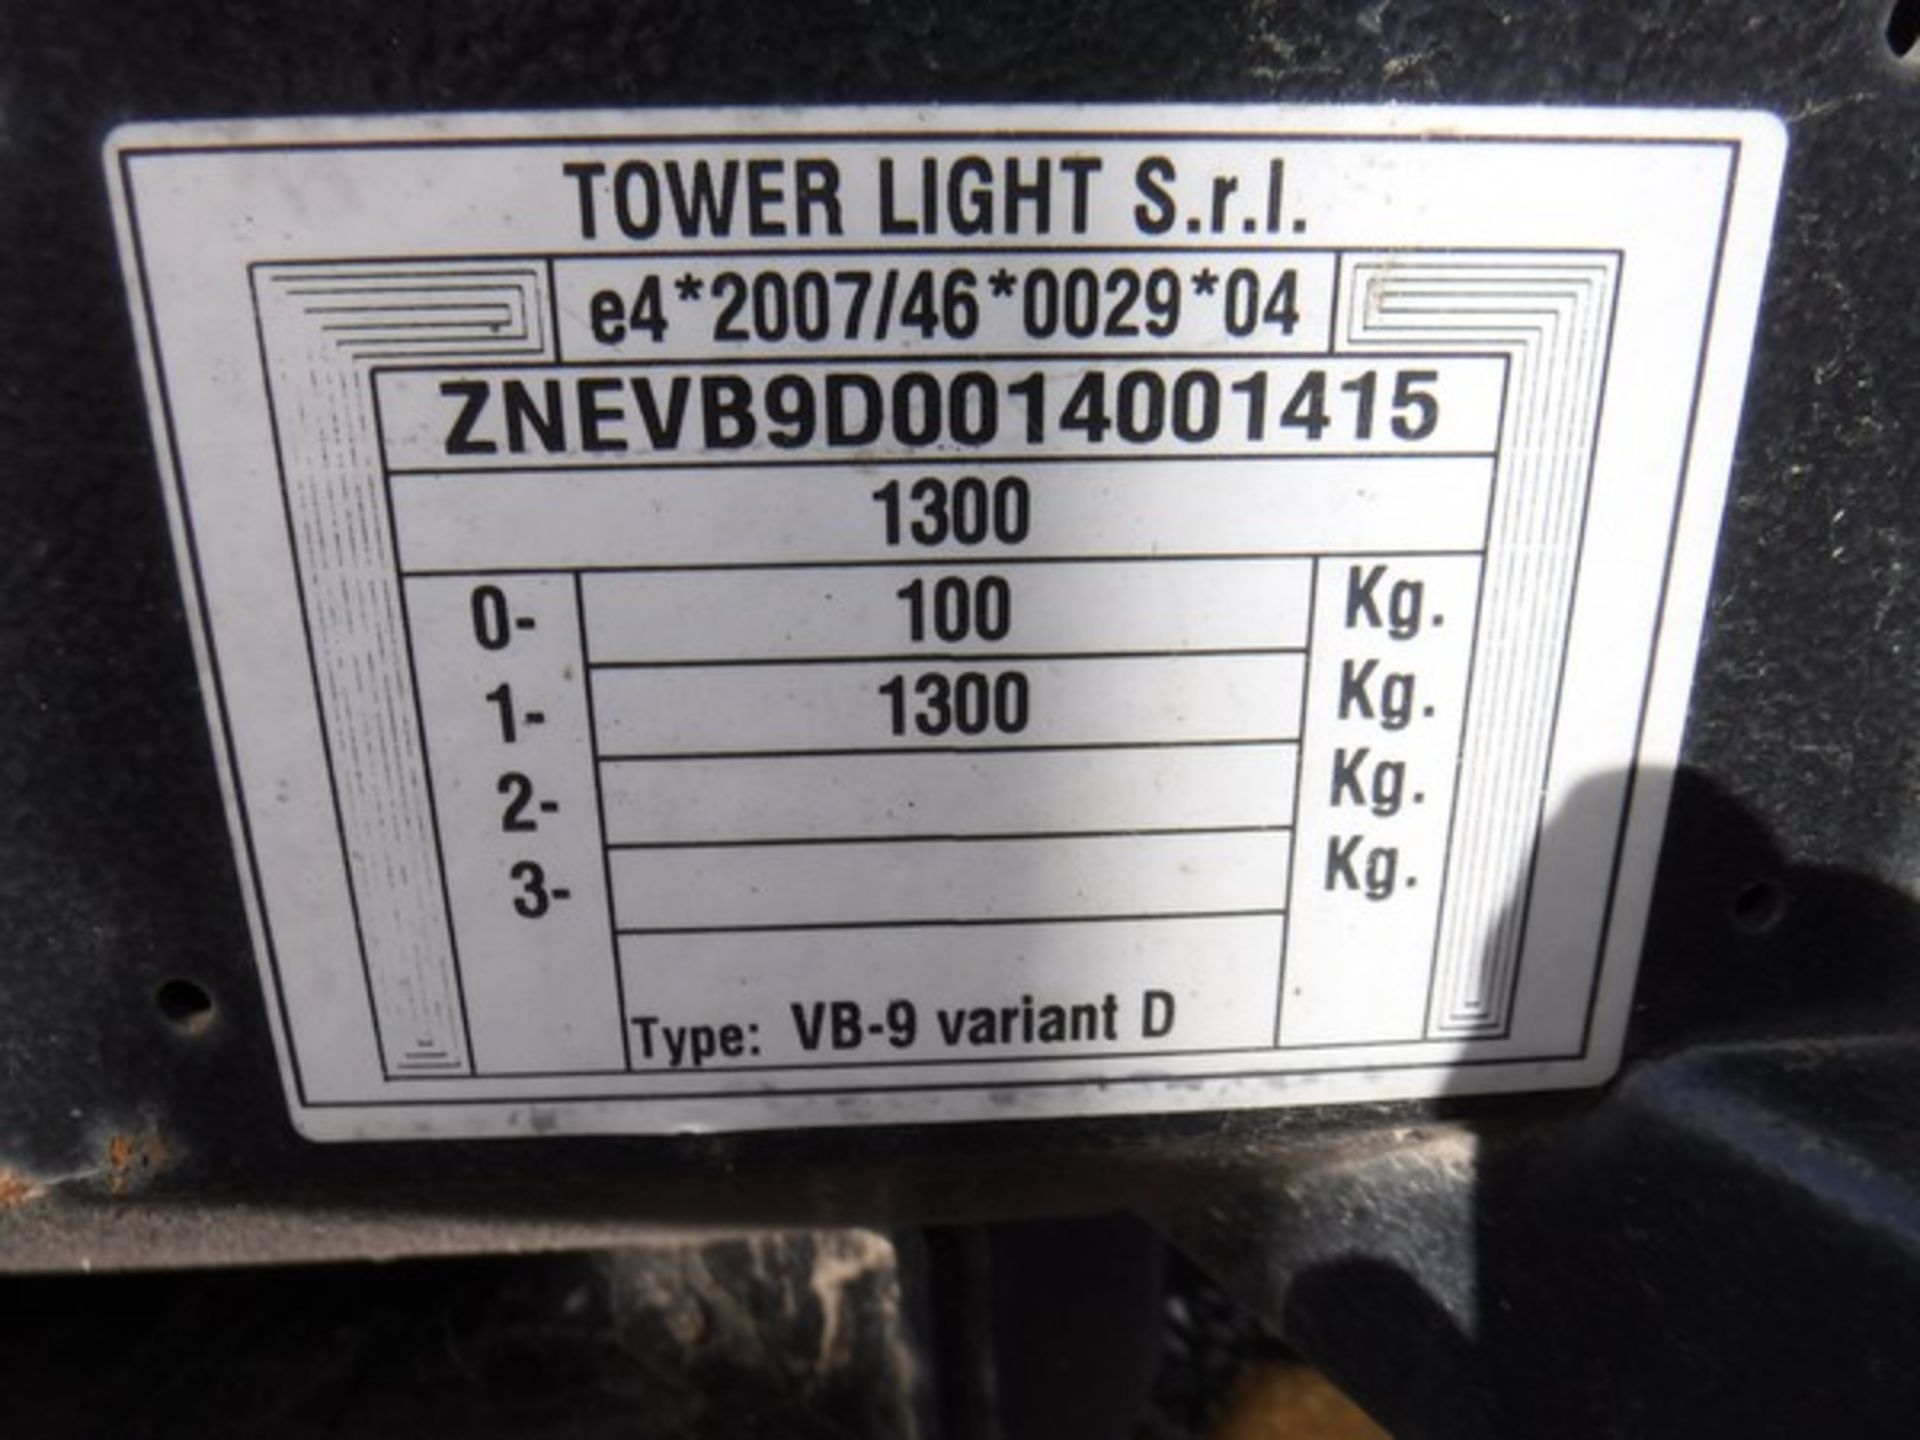 TOWER LIGHT VB9 mobile tower light, galvanised sections, hydraulic lifting system 2.5kva - 230v outl - Image 6 of 6